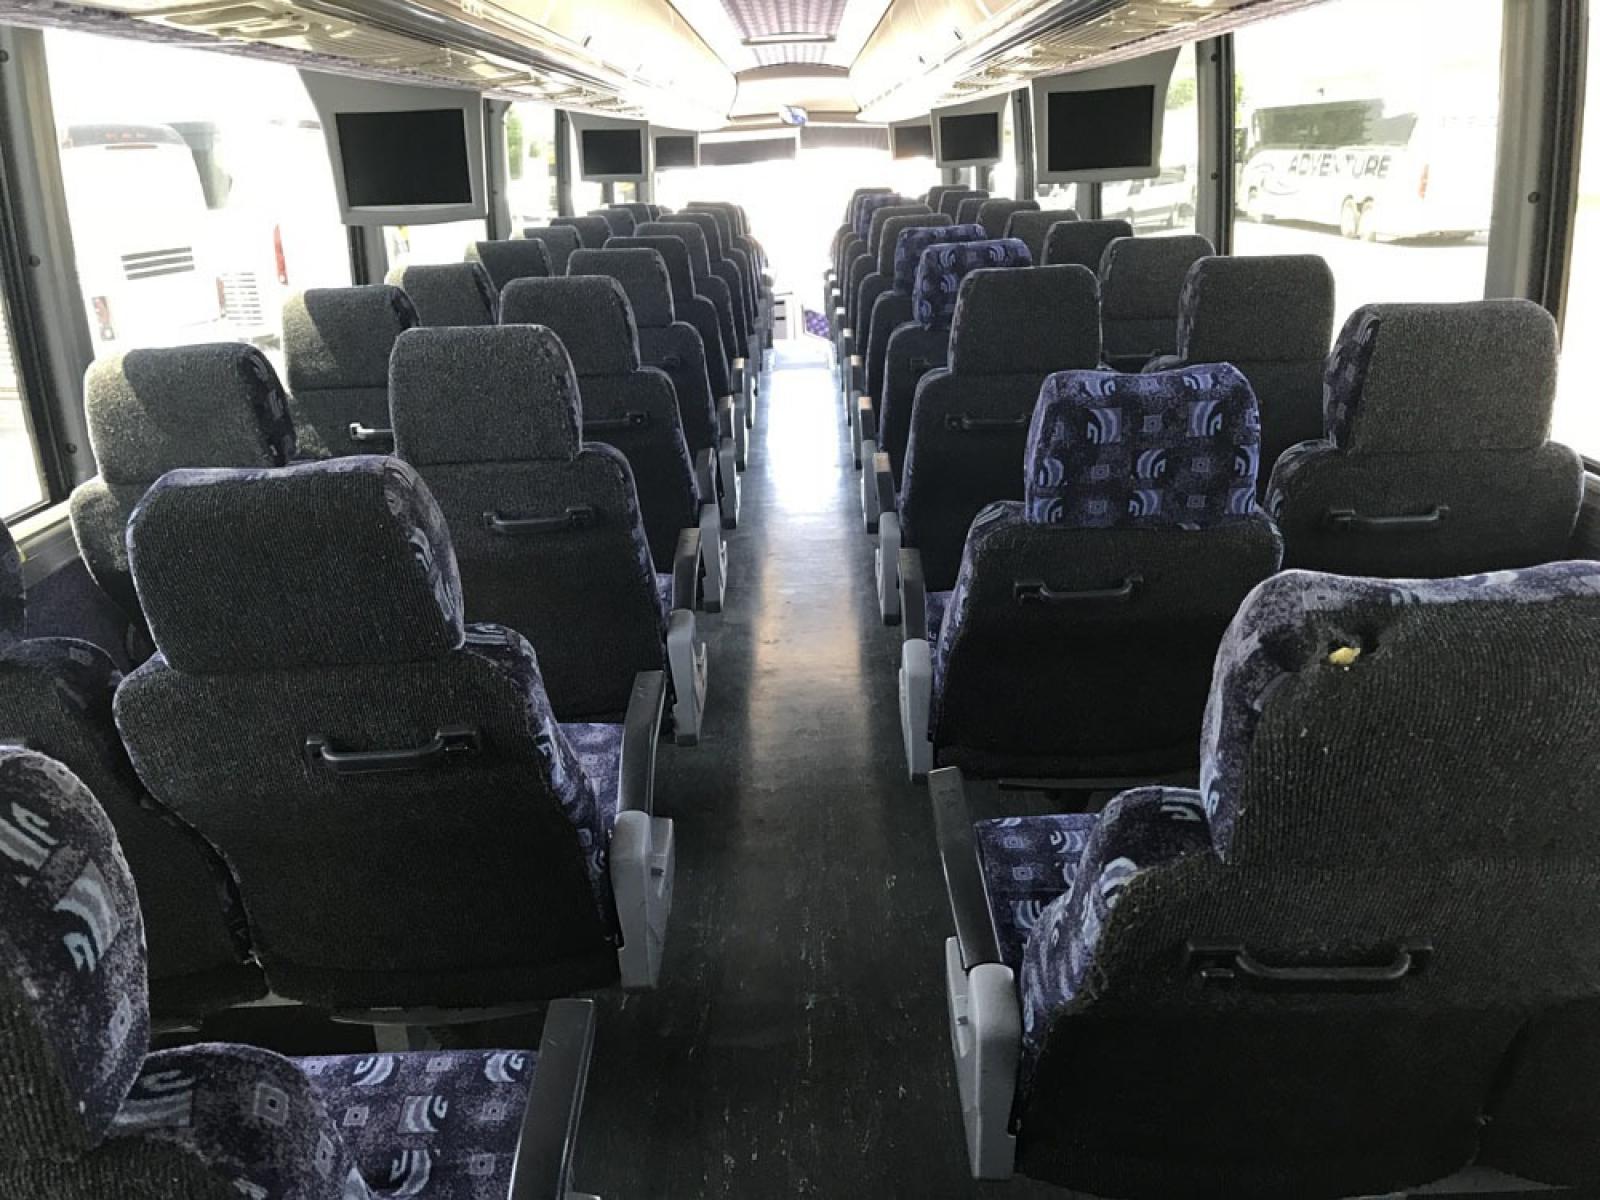 2008 White MCI J4500 with an Cummins ISM engine, ZF AUTO transmission, 0.000000, 0.000000 - 2008 MCI J4500 - Cummins ISM Diesel Engine - ZF Auto Trans. - 45' -- 56 Passengers -- Seat Belts - Flat Screens and DVD - Aluminum Wheels - Enclosed parcel racks – Restroom - Photo #5